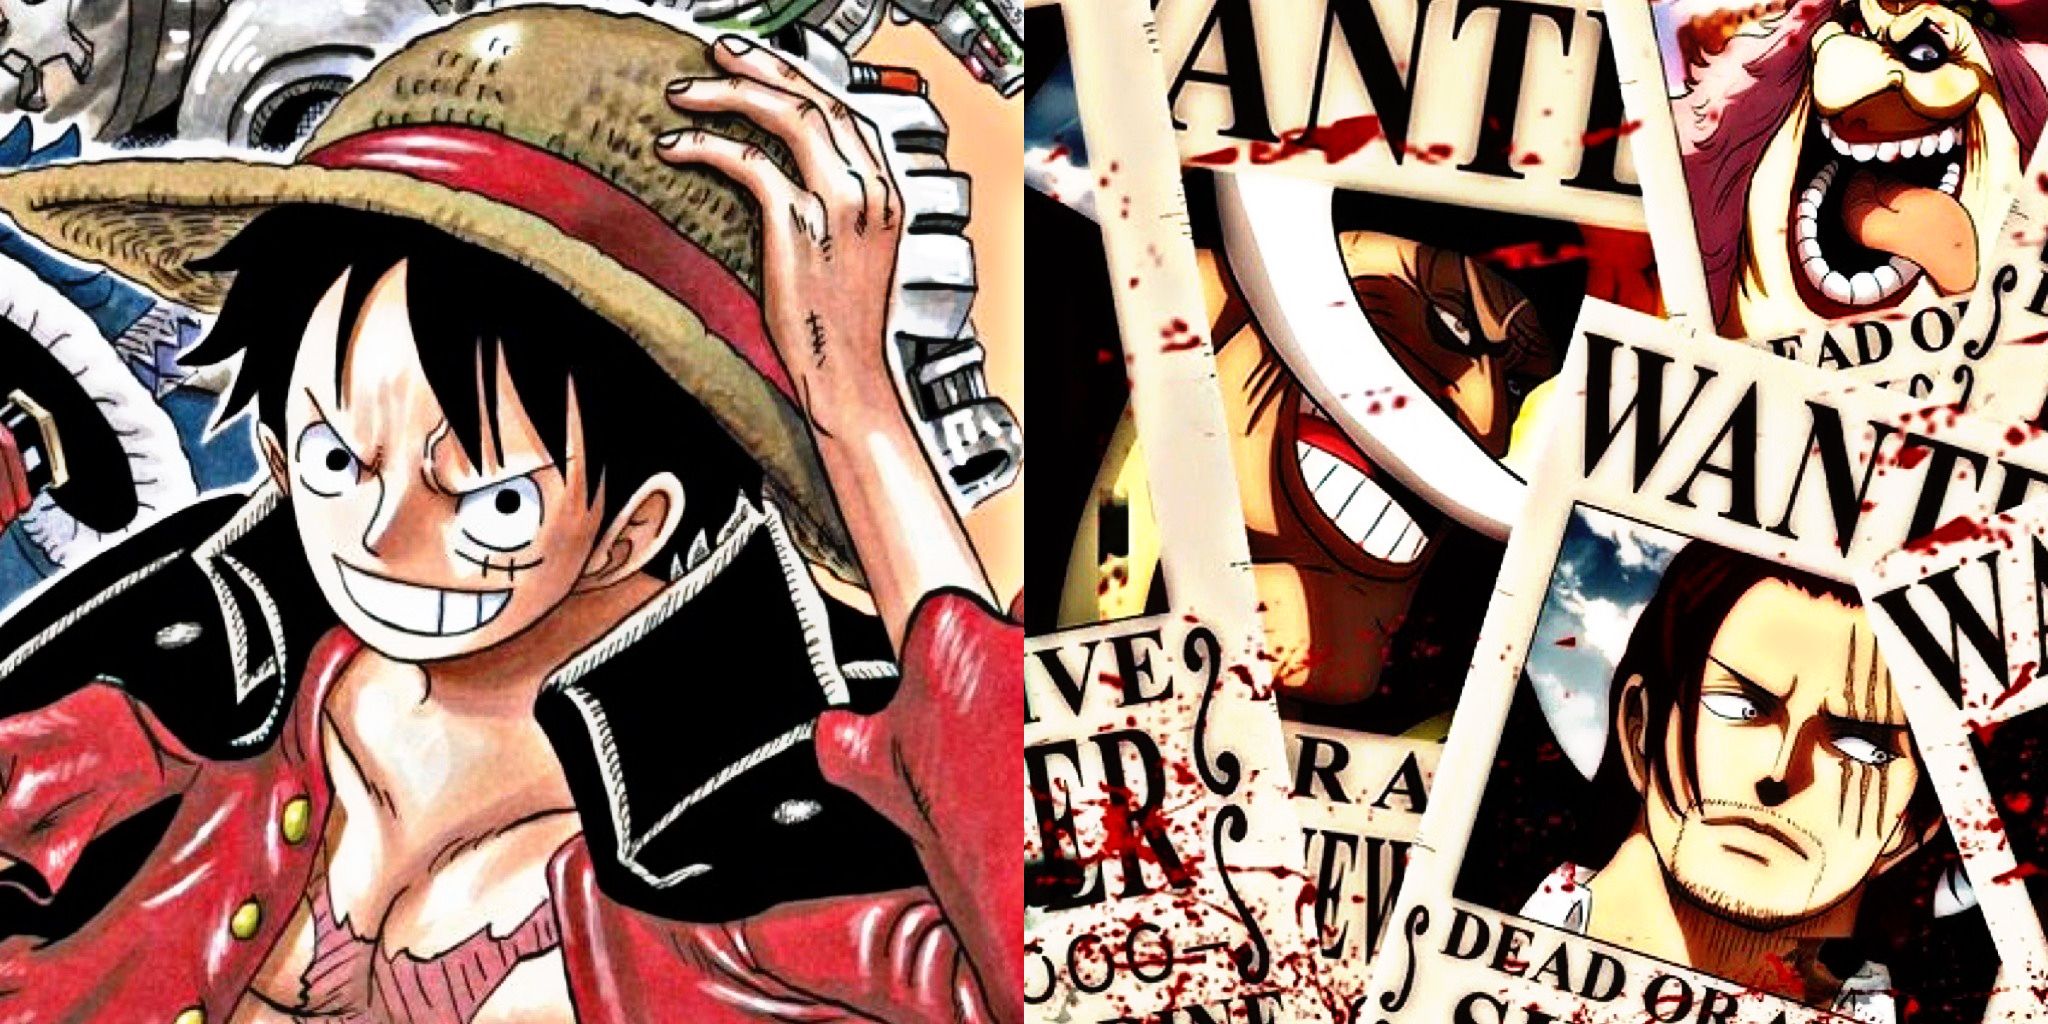 Why the One Piece anime is going on hiatus, explained